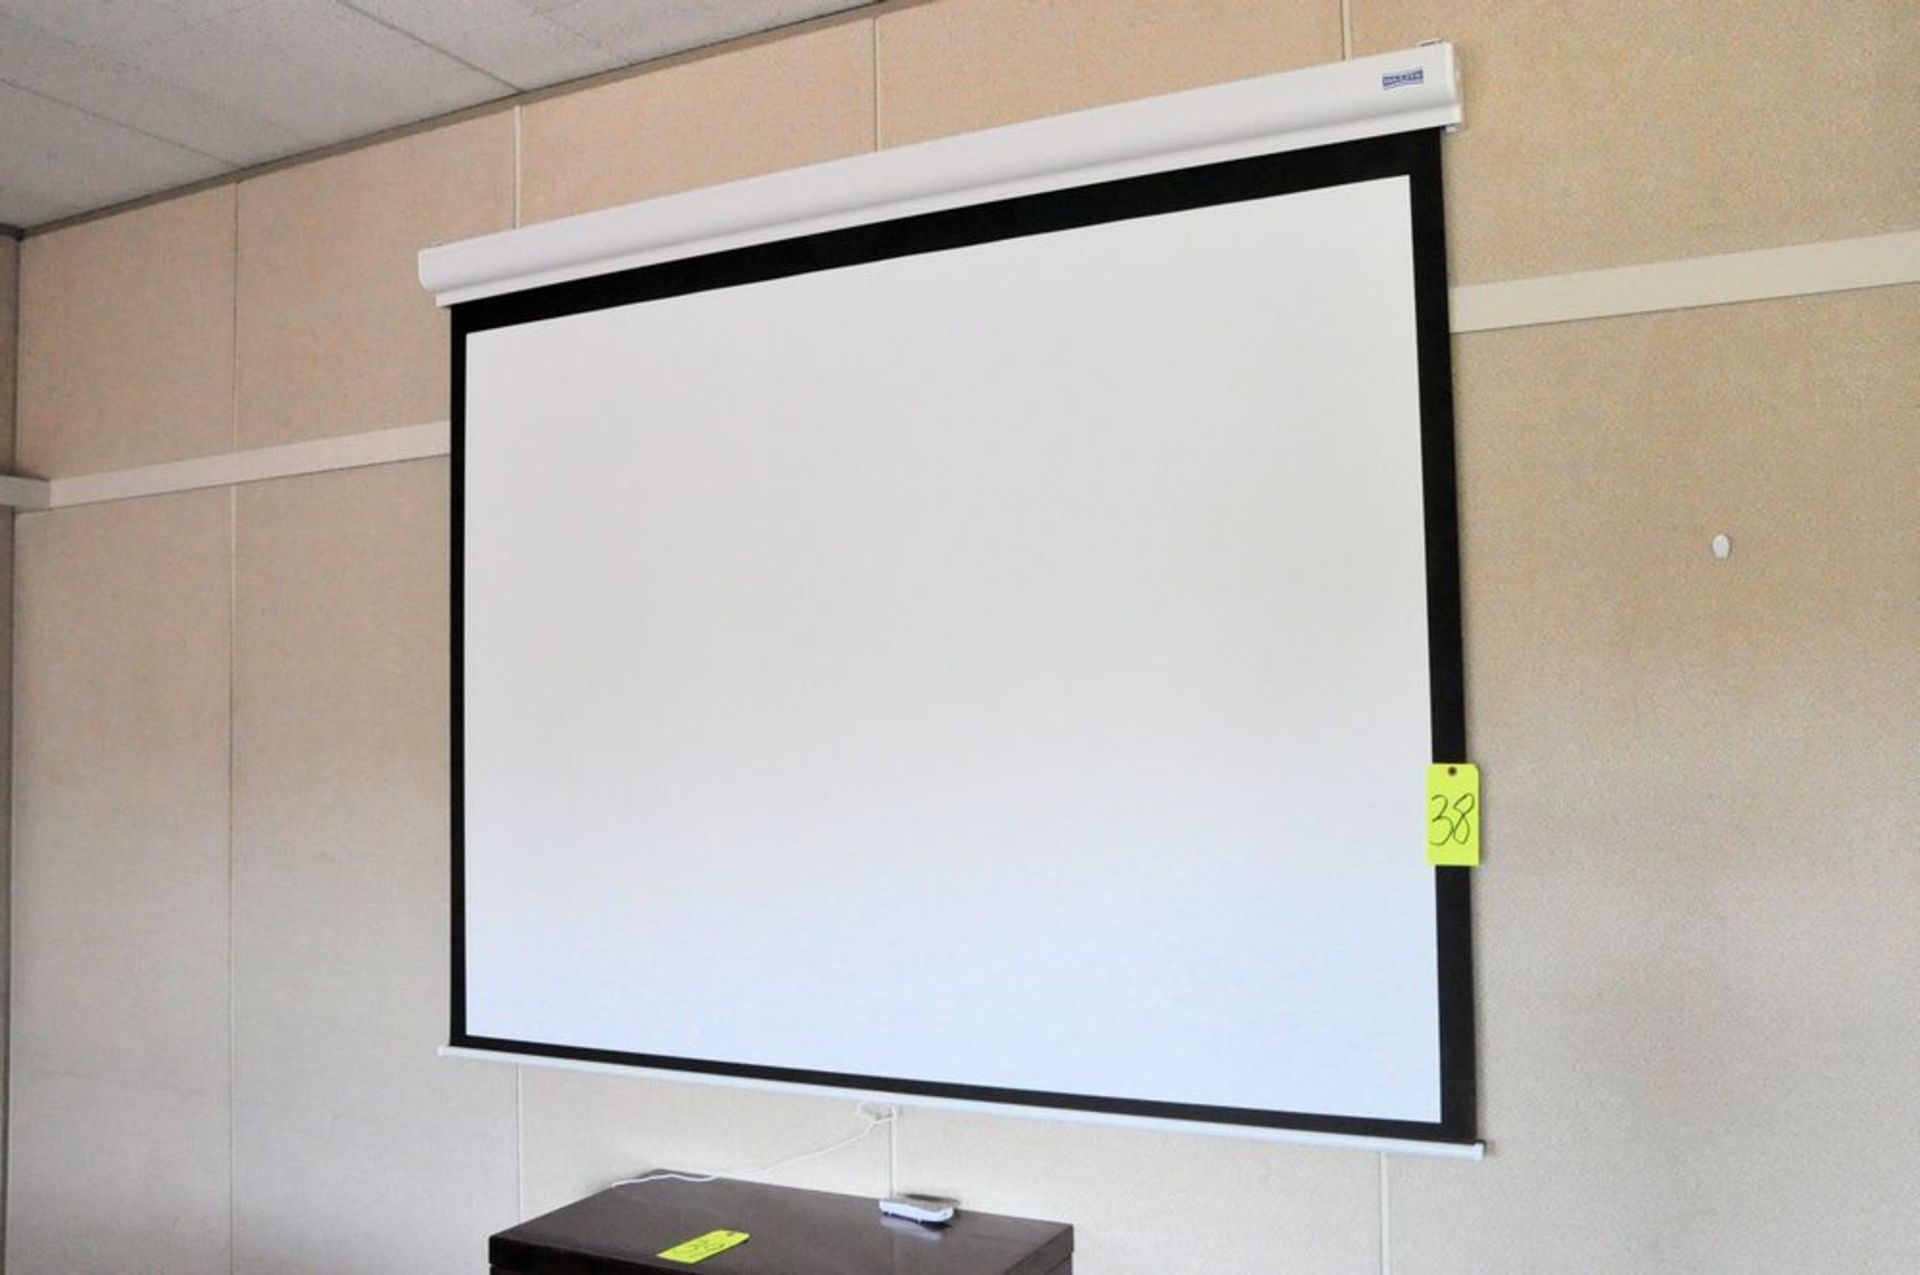 Lot-(1) Hitachi CP-X3015WN Projector and (1) Wall Mounted Projector Screen in (1) Room), (TR4- - Image 2 of 3